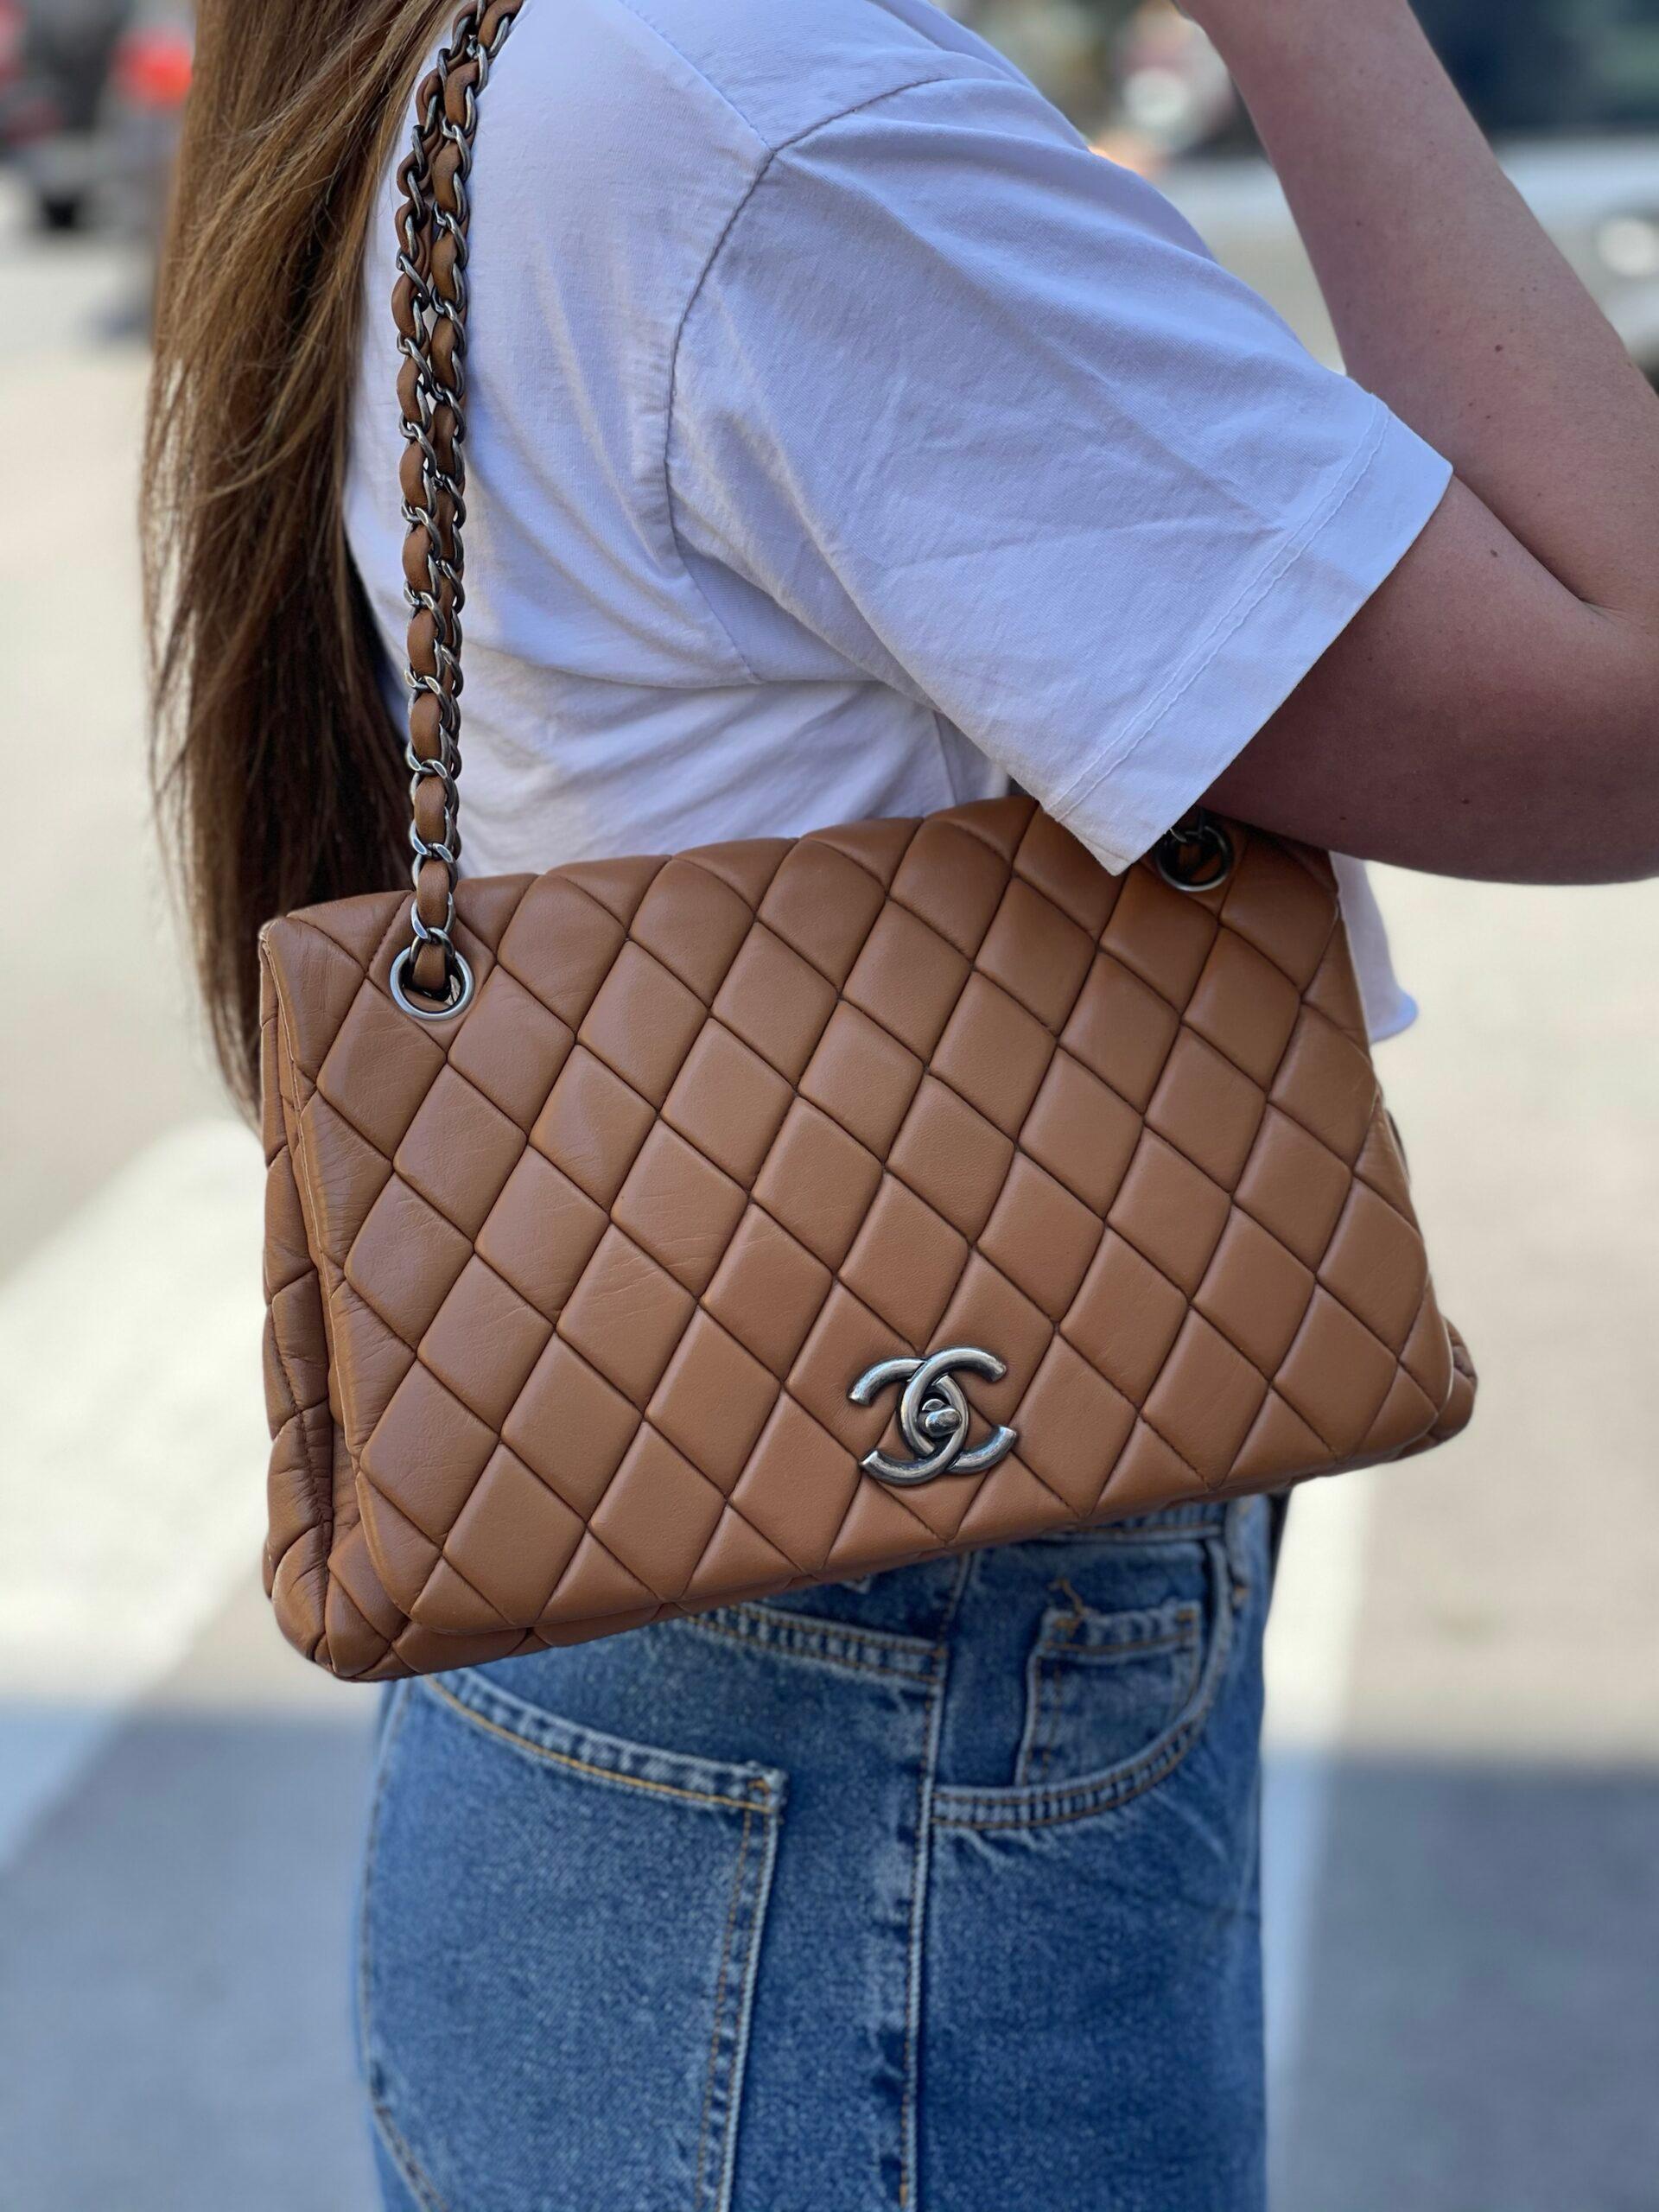 Chanel bag made of brown leather with silver hardware.
Closure with CC logo, internally quite large.
Equipped with leather shoulder strap and sliding chain.
The bag is in good condition, year of production 2010/2011.

Dimensions: 8 × 30 × 17 cm
